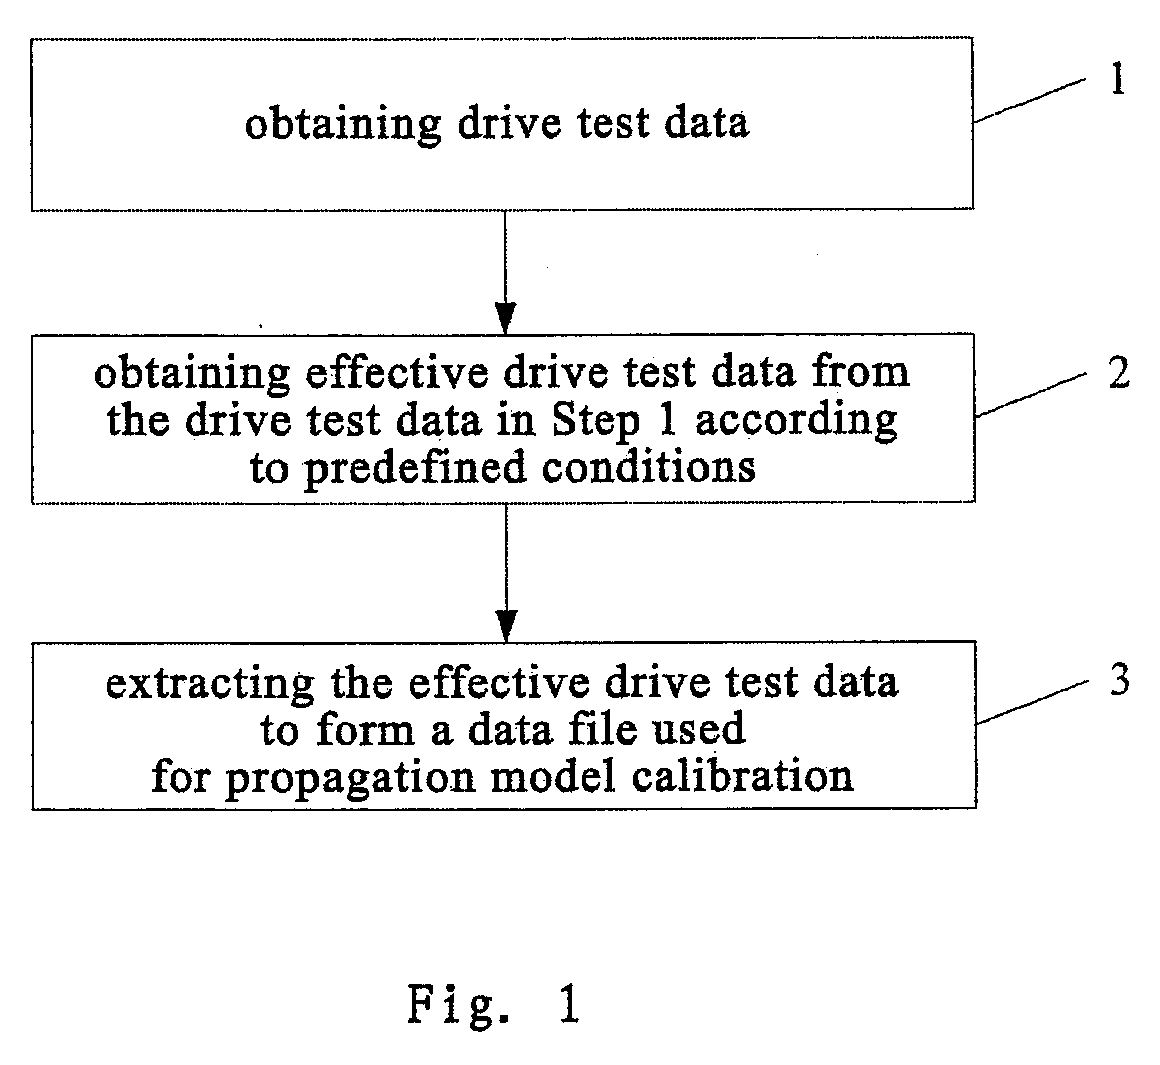 Method and apparatus of using drive test data for propagation model calibration